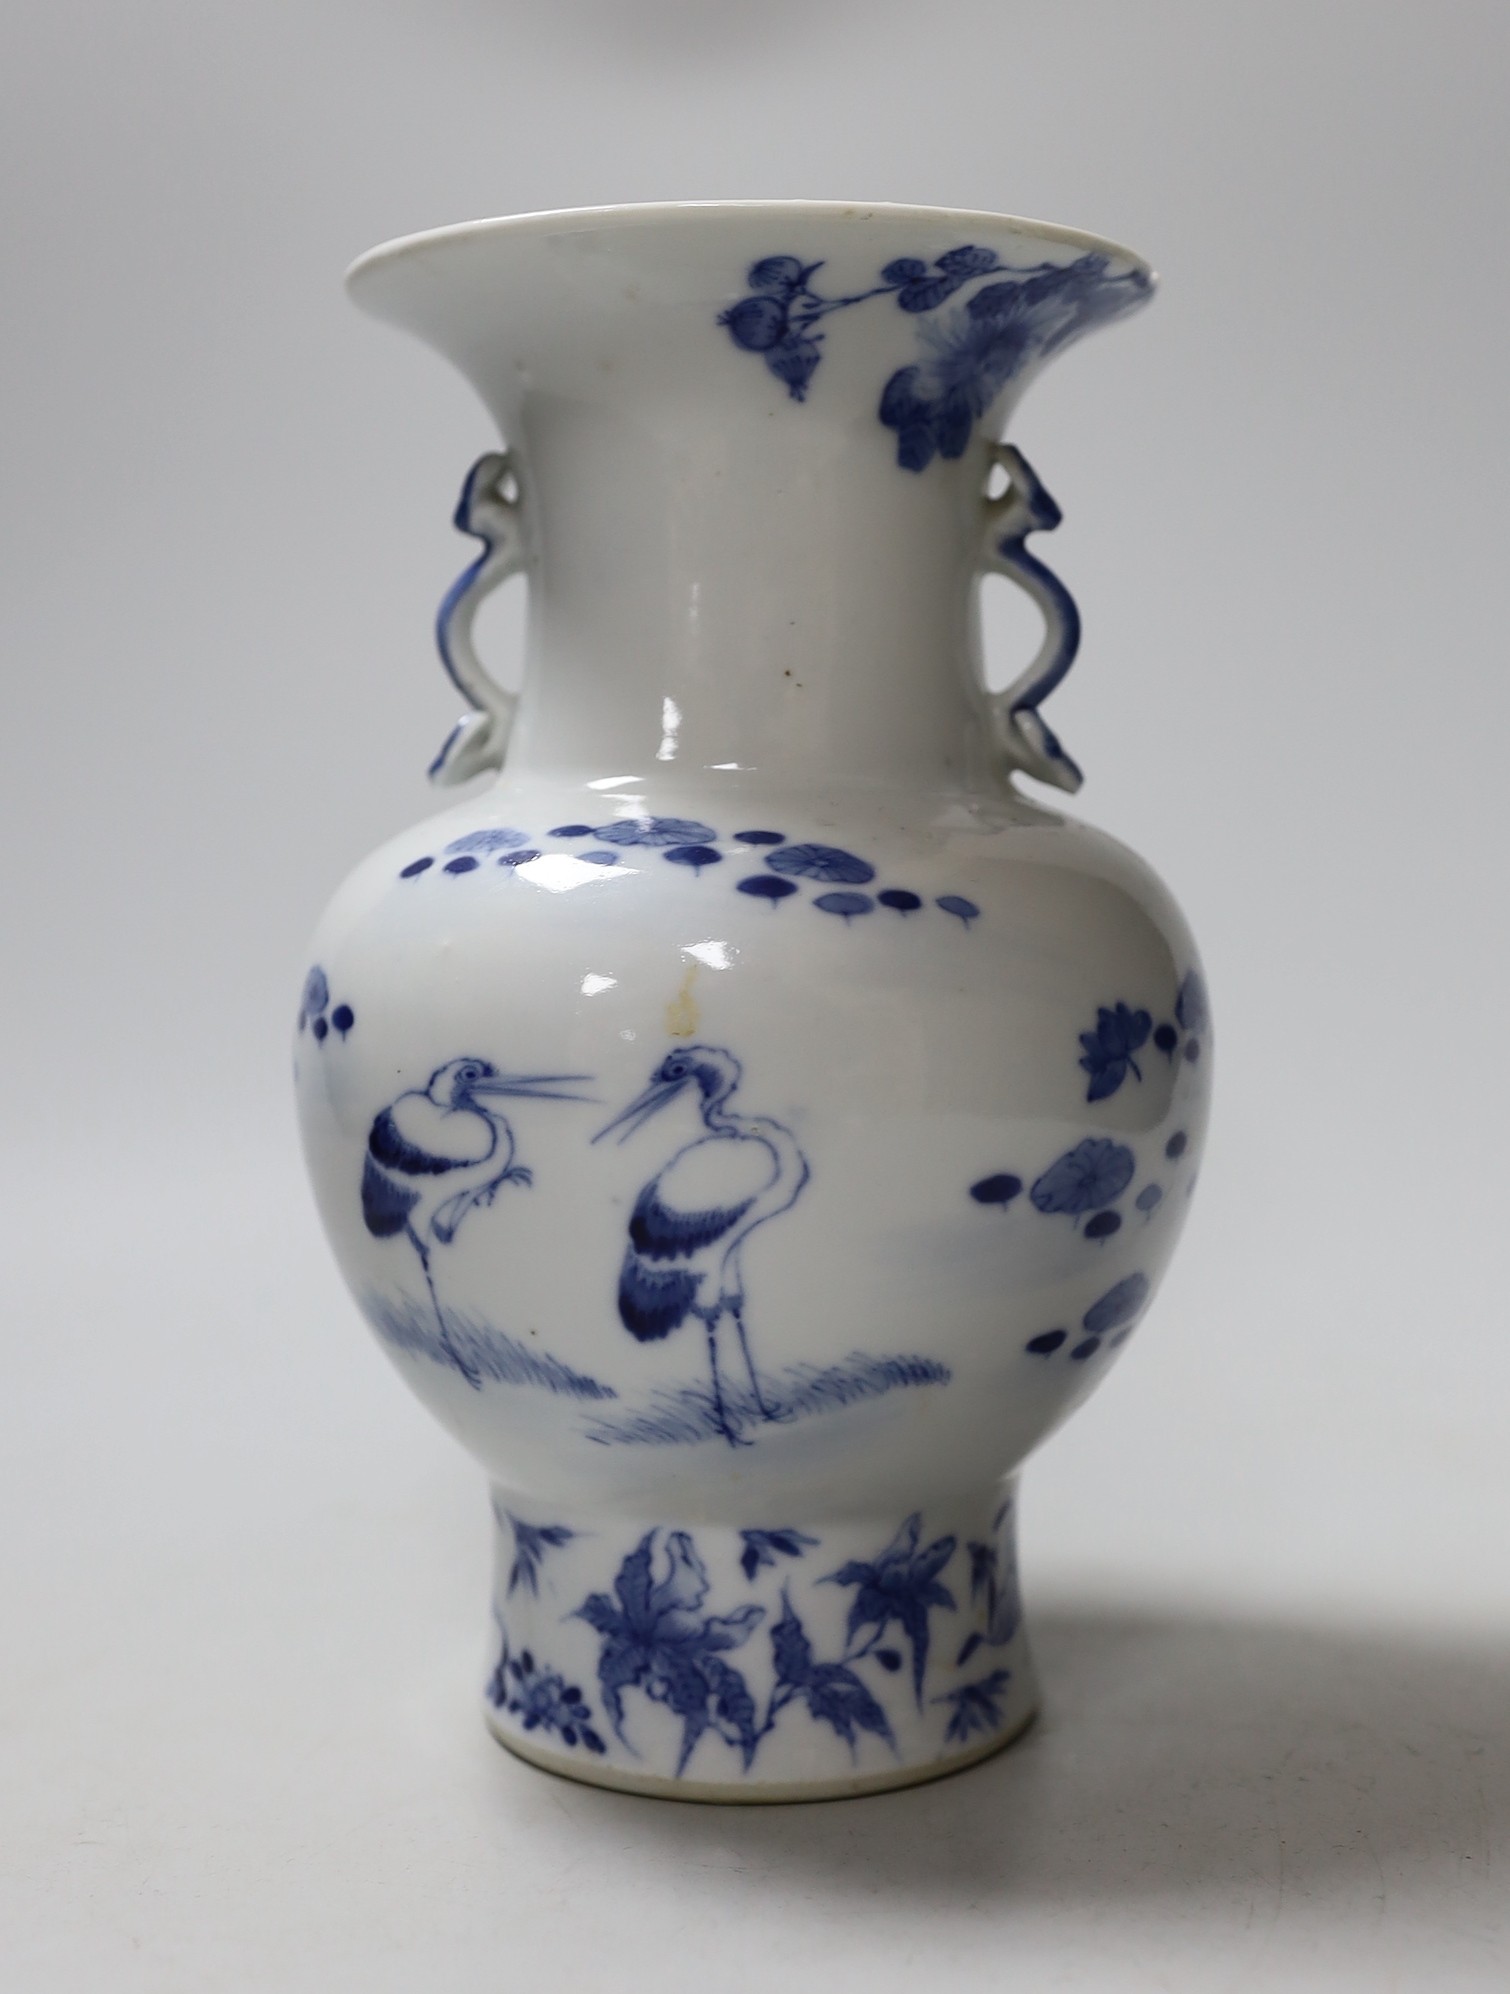 A small Chinese twin handled blue and white porcelain vase, Kangxi marks to underside, 19th century, 20cms high